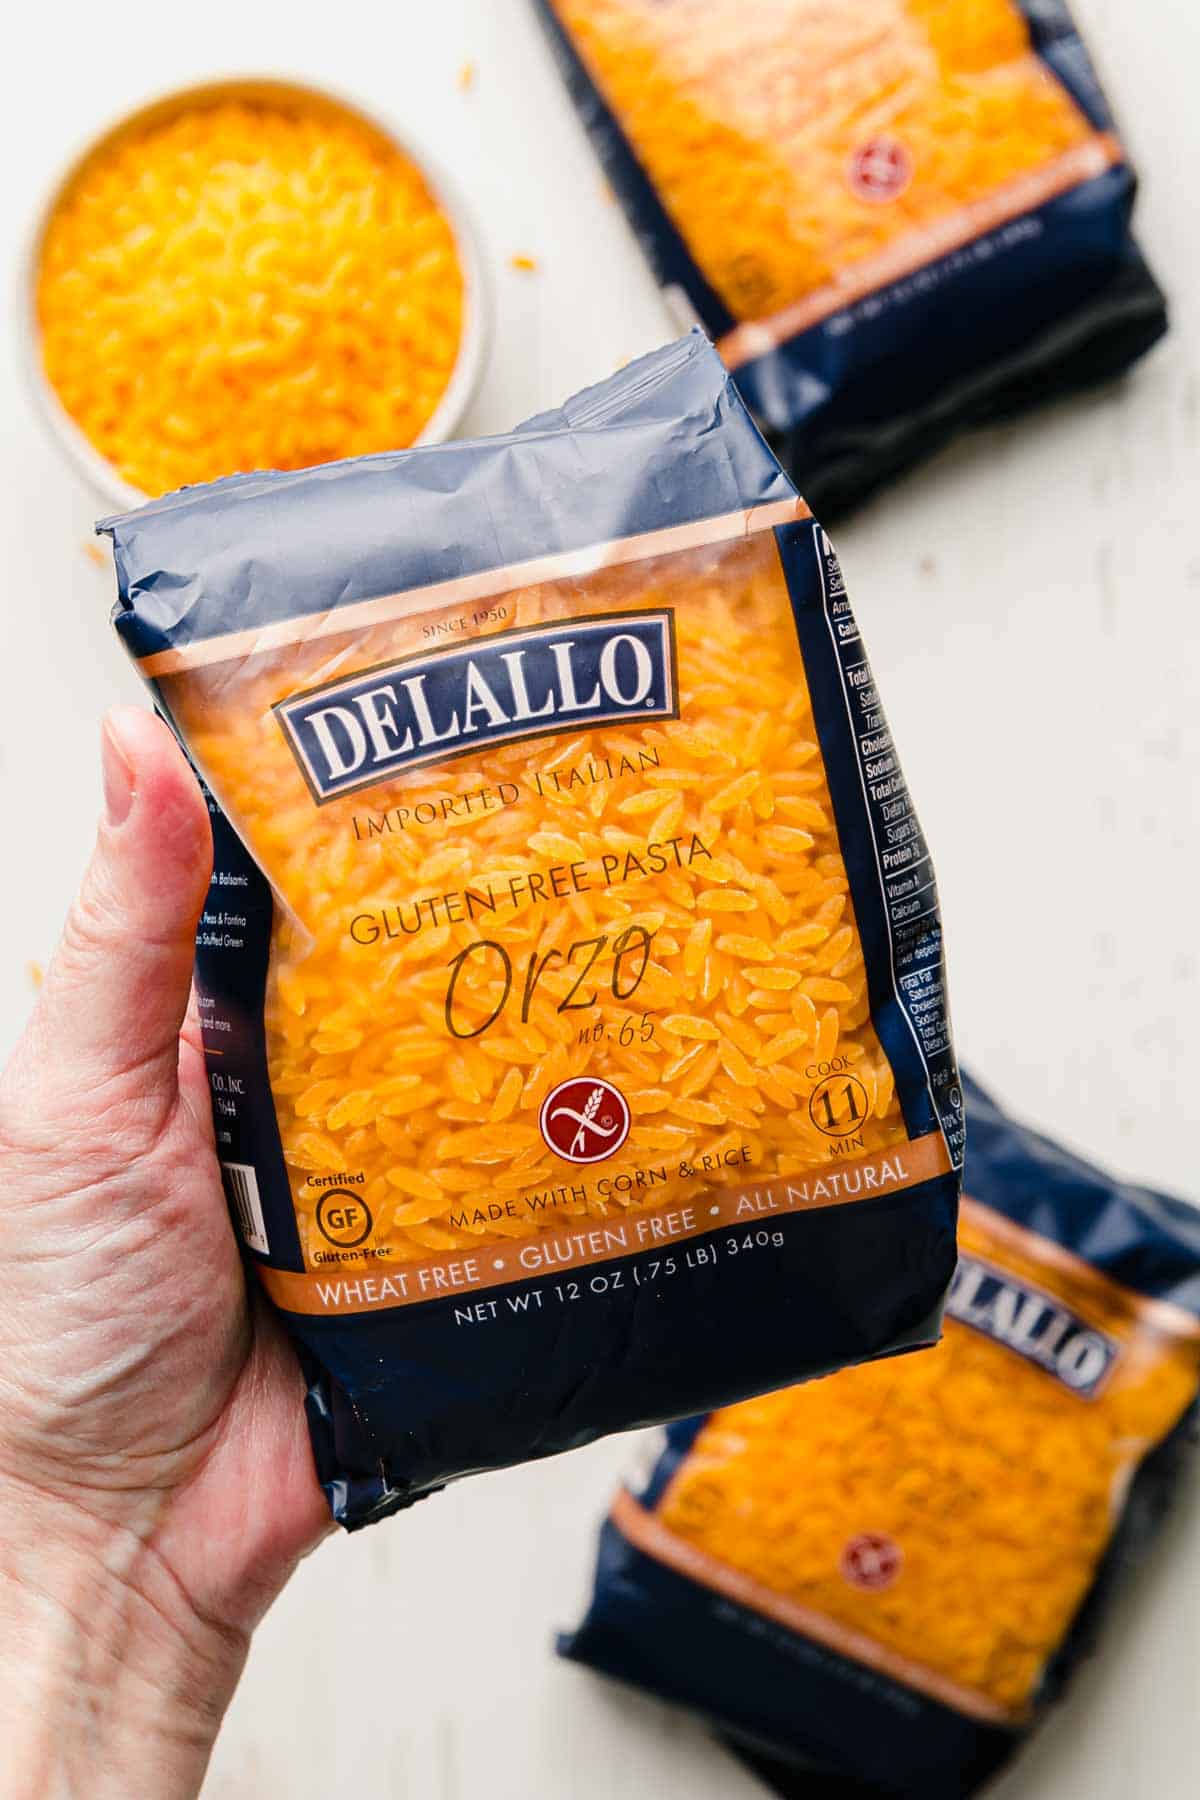 A package of dellalo gluten free orzo held by a hand.